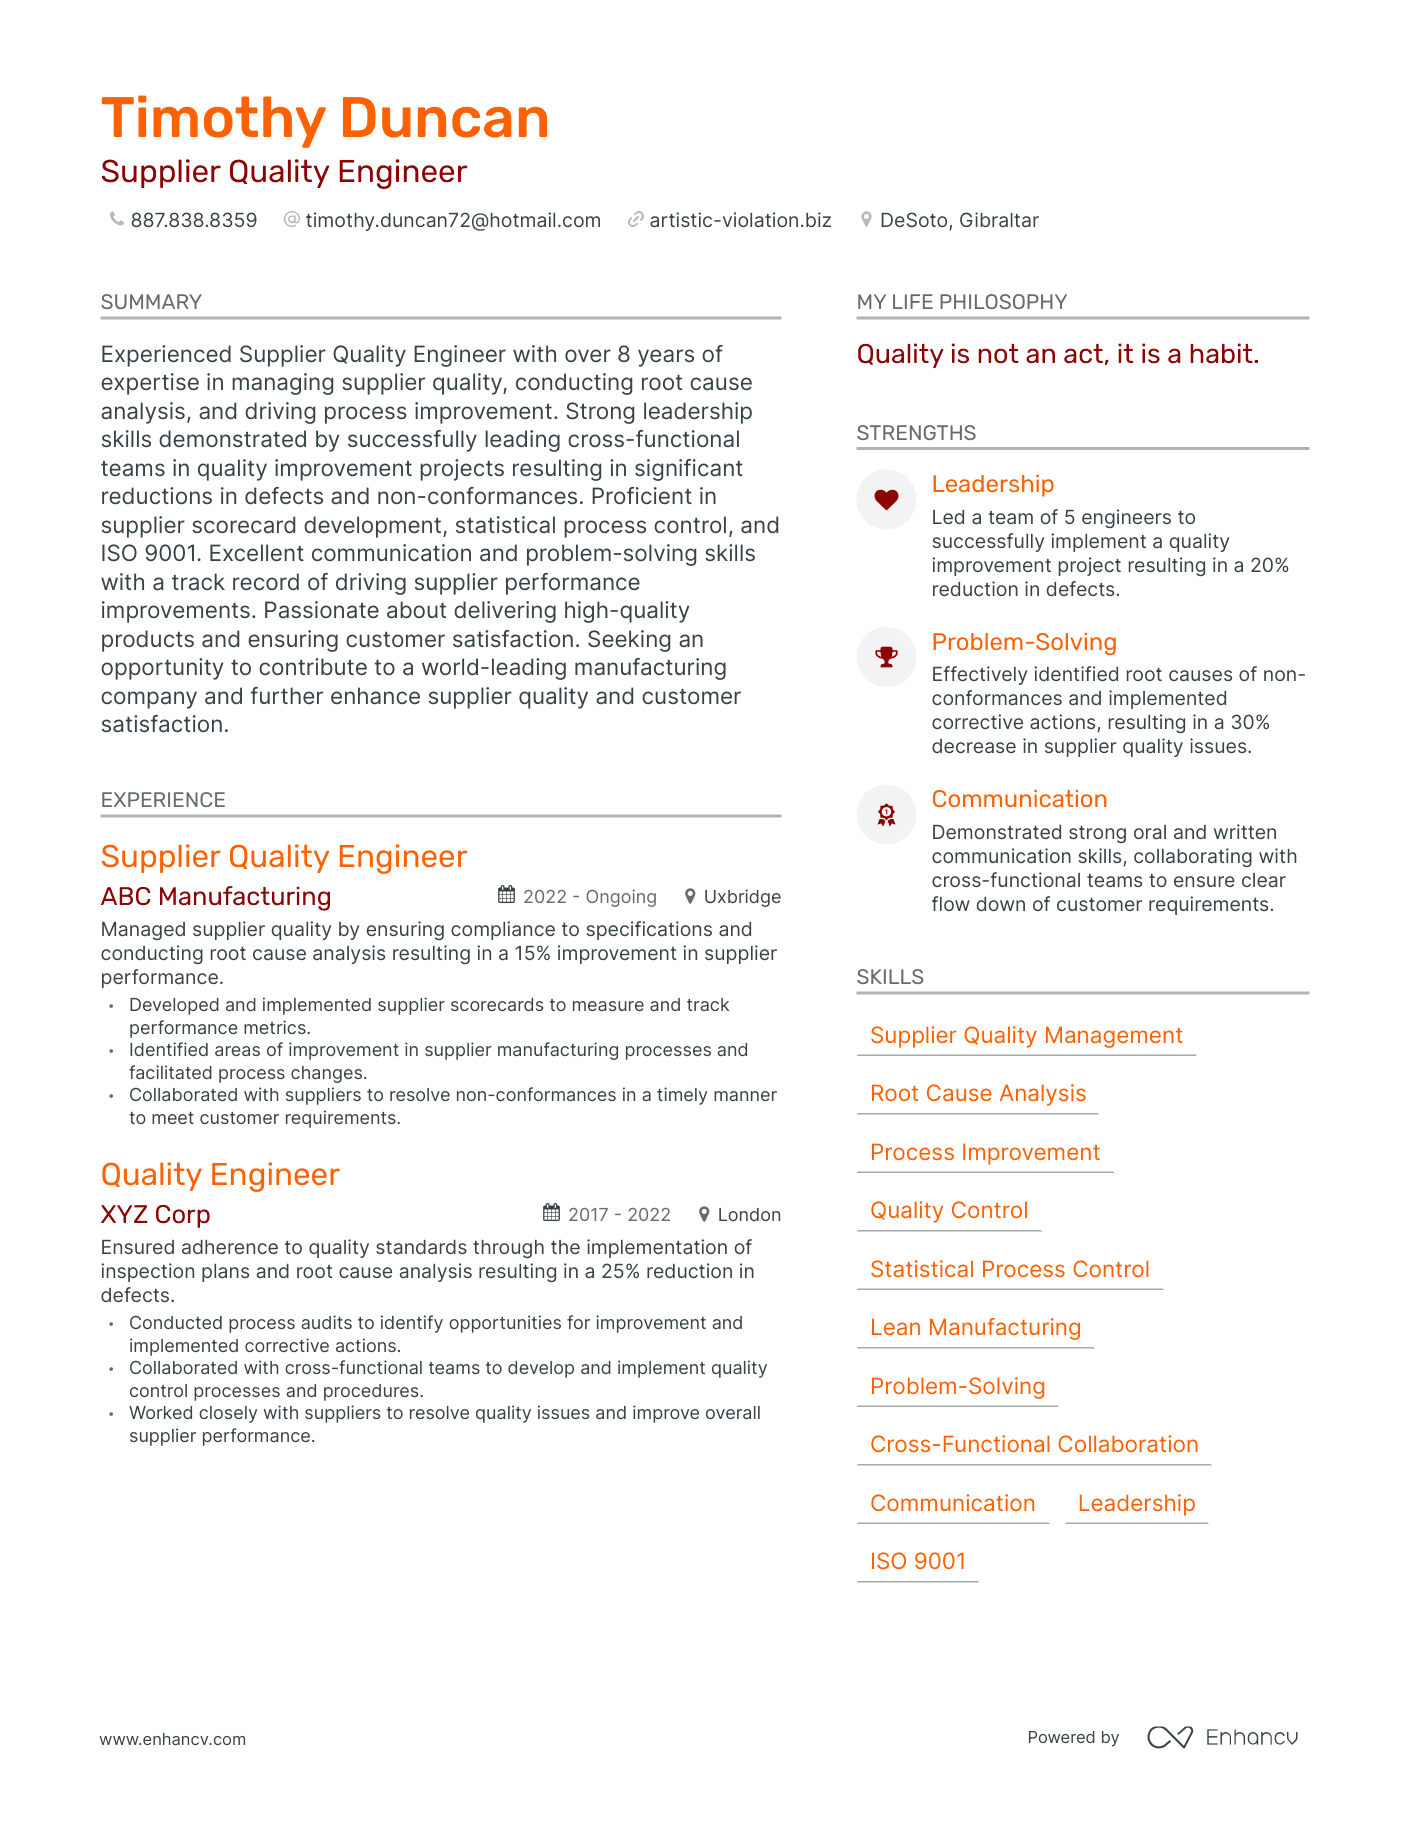 Supplier Quality Engineer resume example